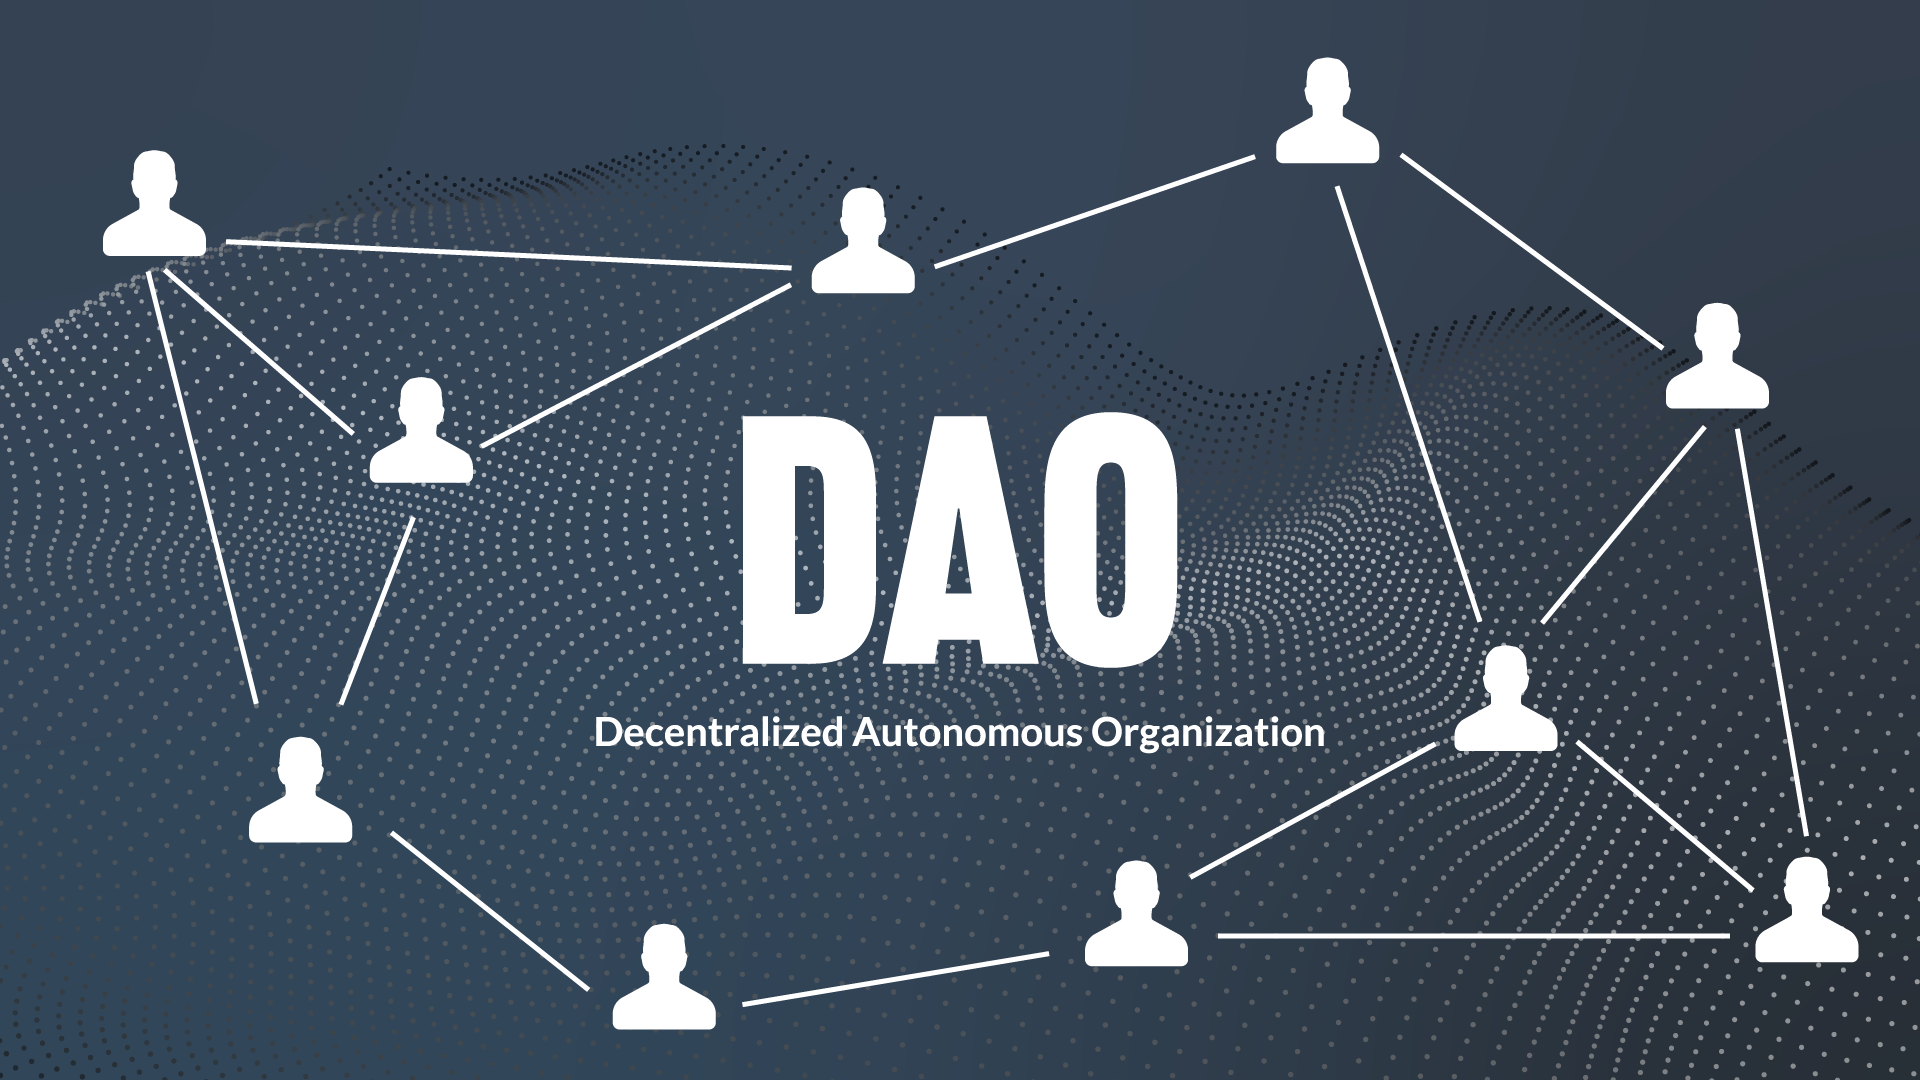 Graphic image of DAO representing decentralized autonomous organization with network of silhouettes against navy blue background